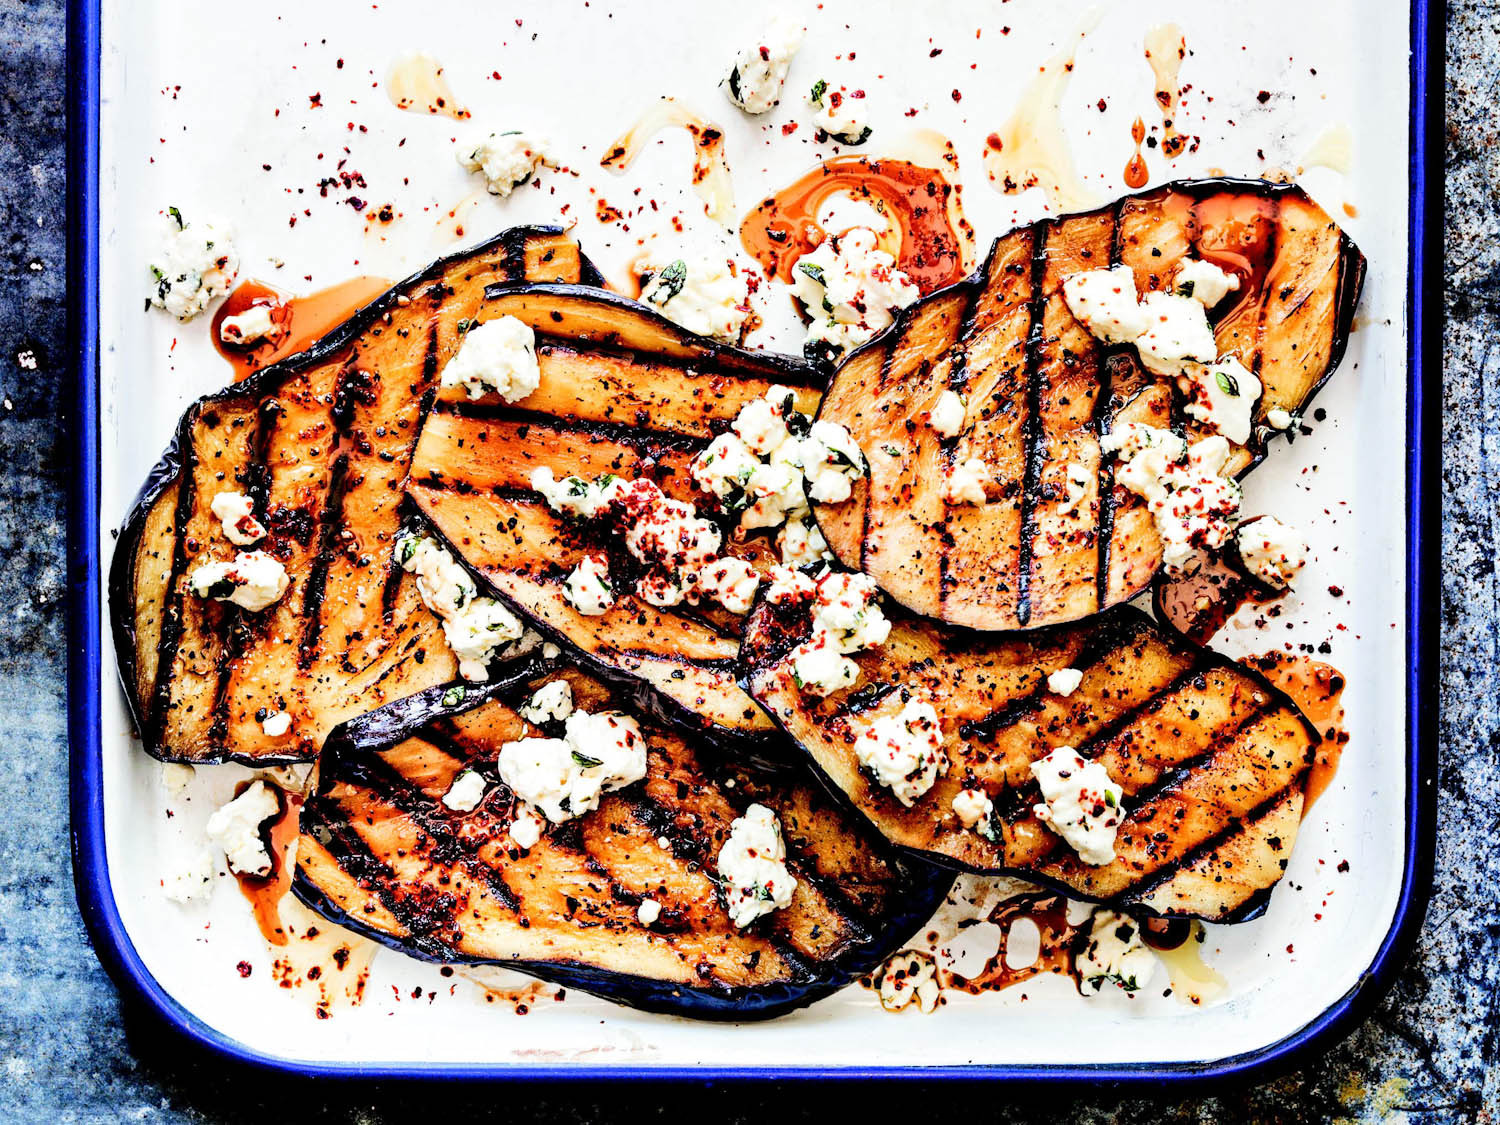 Grilled Eggplant Recipe
 Grilled Eggplant With Feta and Maras Pepper From The Big